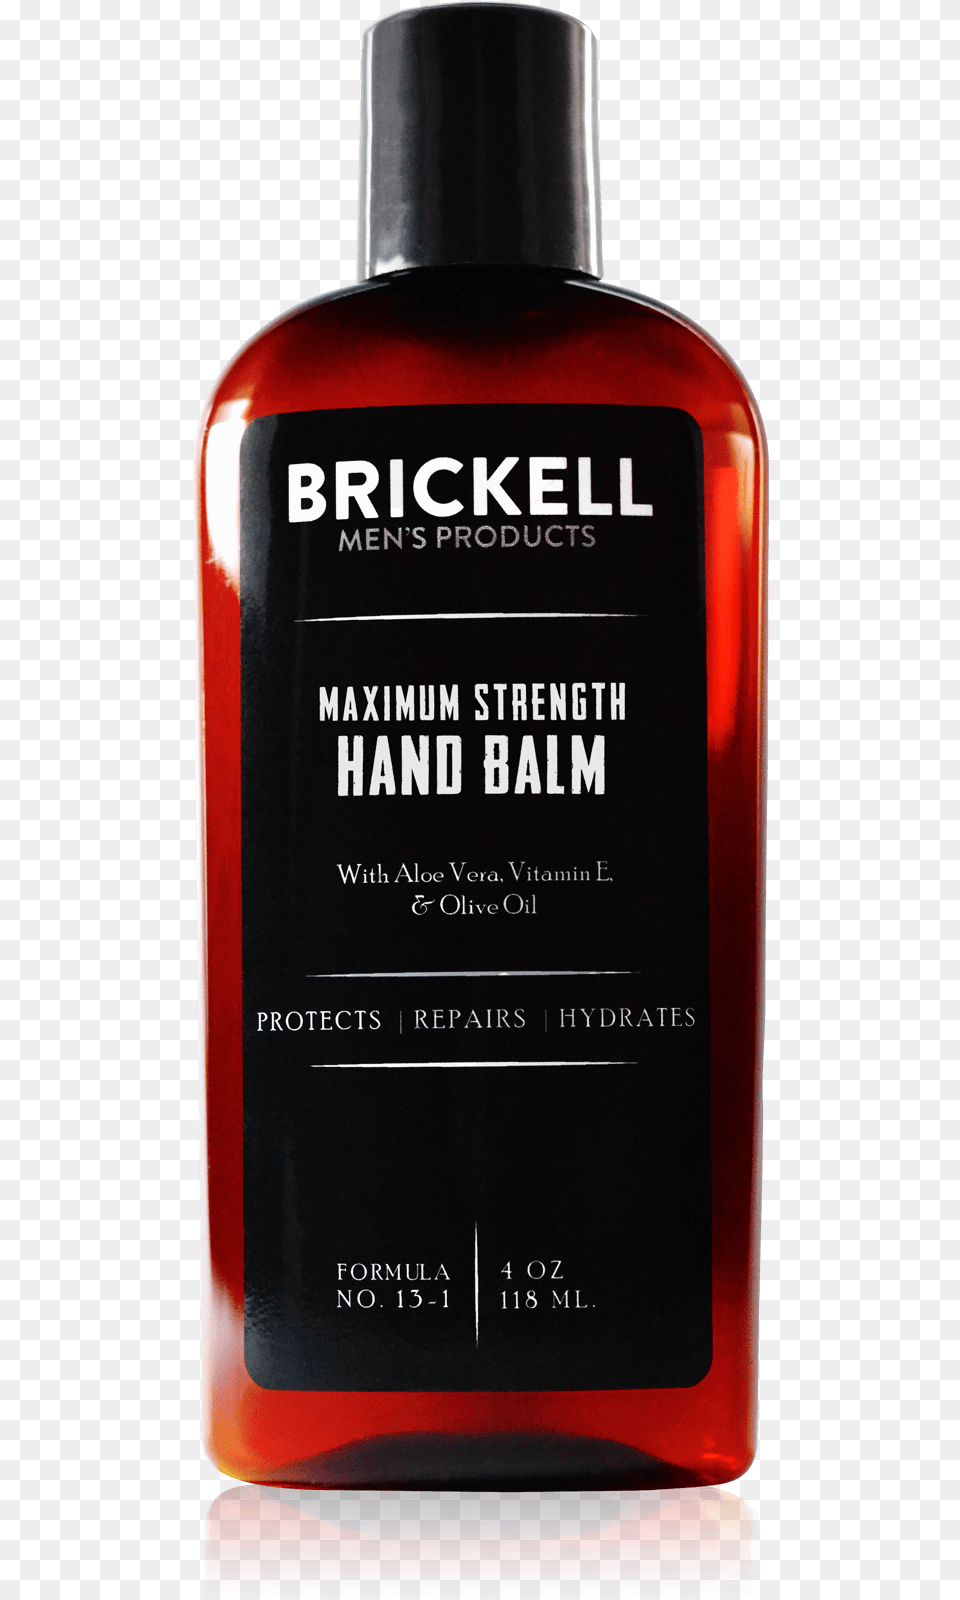 Brickell Men39s Daily Essential Face Moisturiser, Bottle, Aftershave, Cosmetics, Perfume Free Png